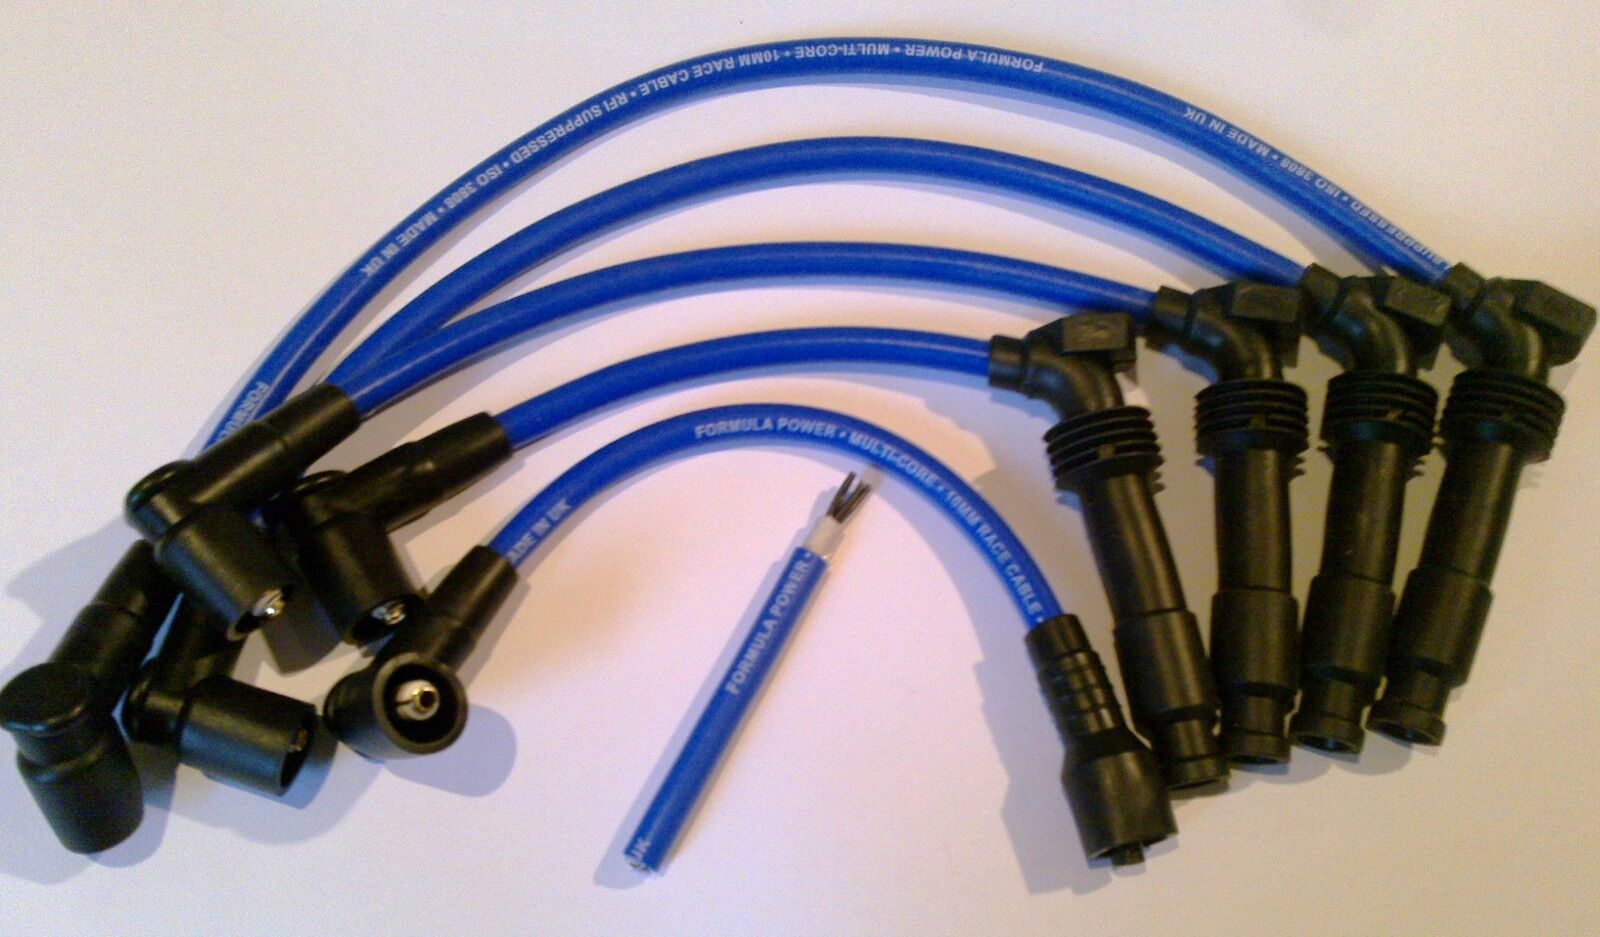 Opel Astra F Gsi ,vectra C20xe Formula Power 8mm Performance Ignition Lead Set.